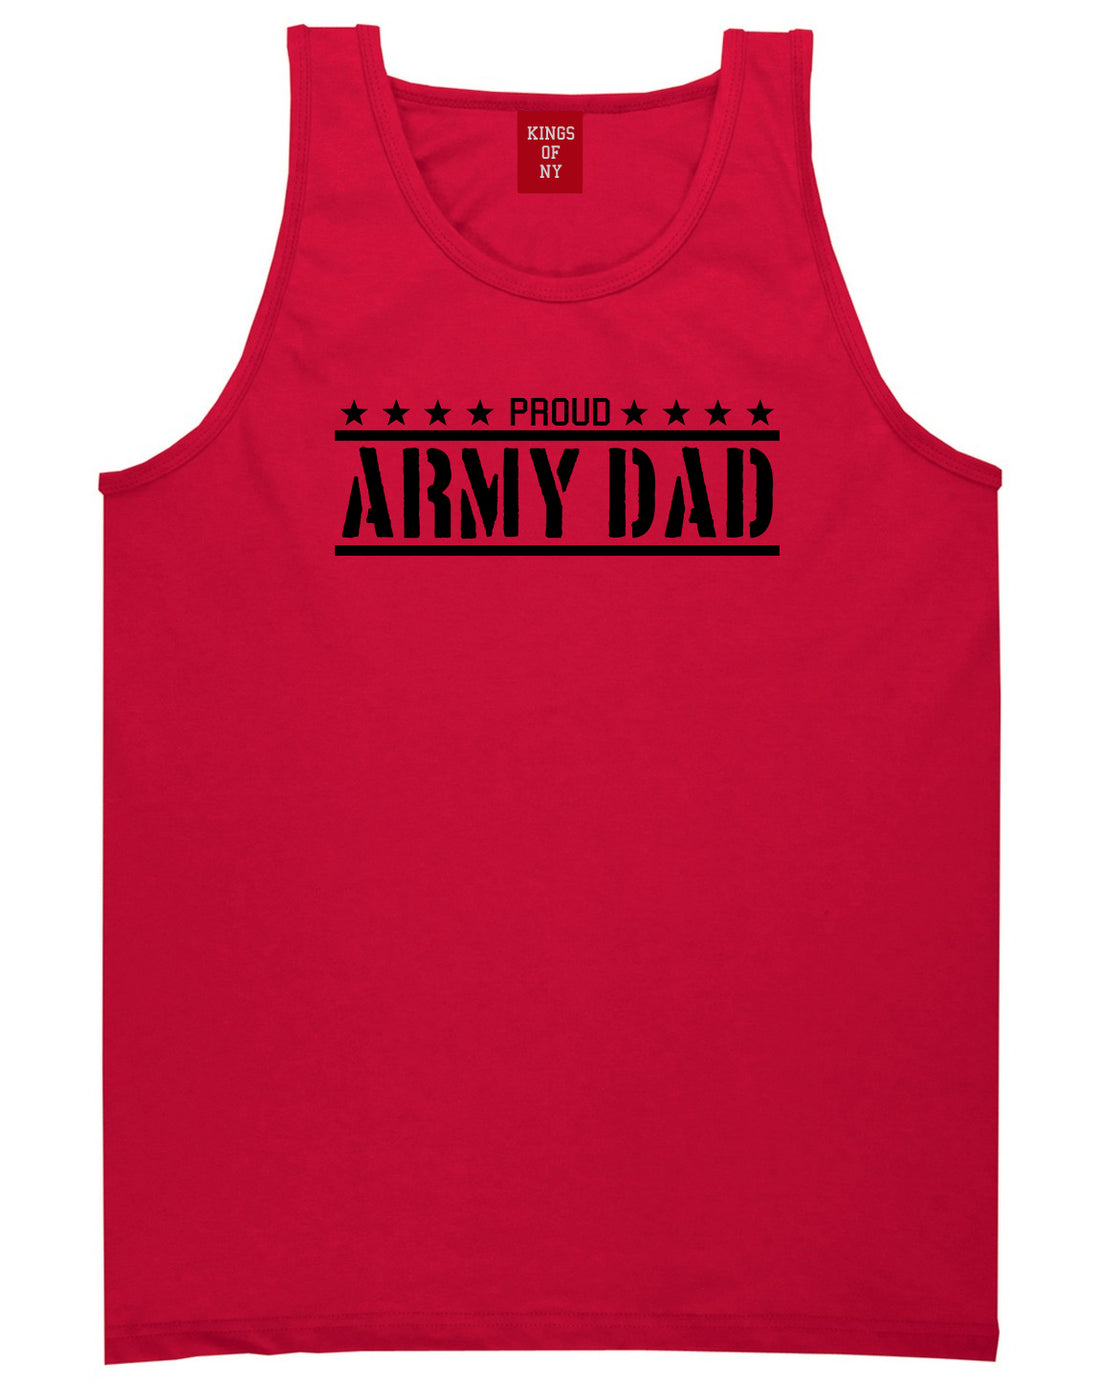 Proud Army Dad Military Mens Tank Top Shirt Red by Kings Of NY